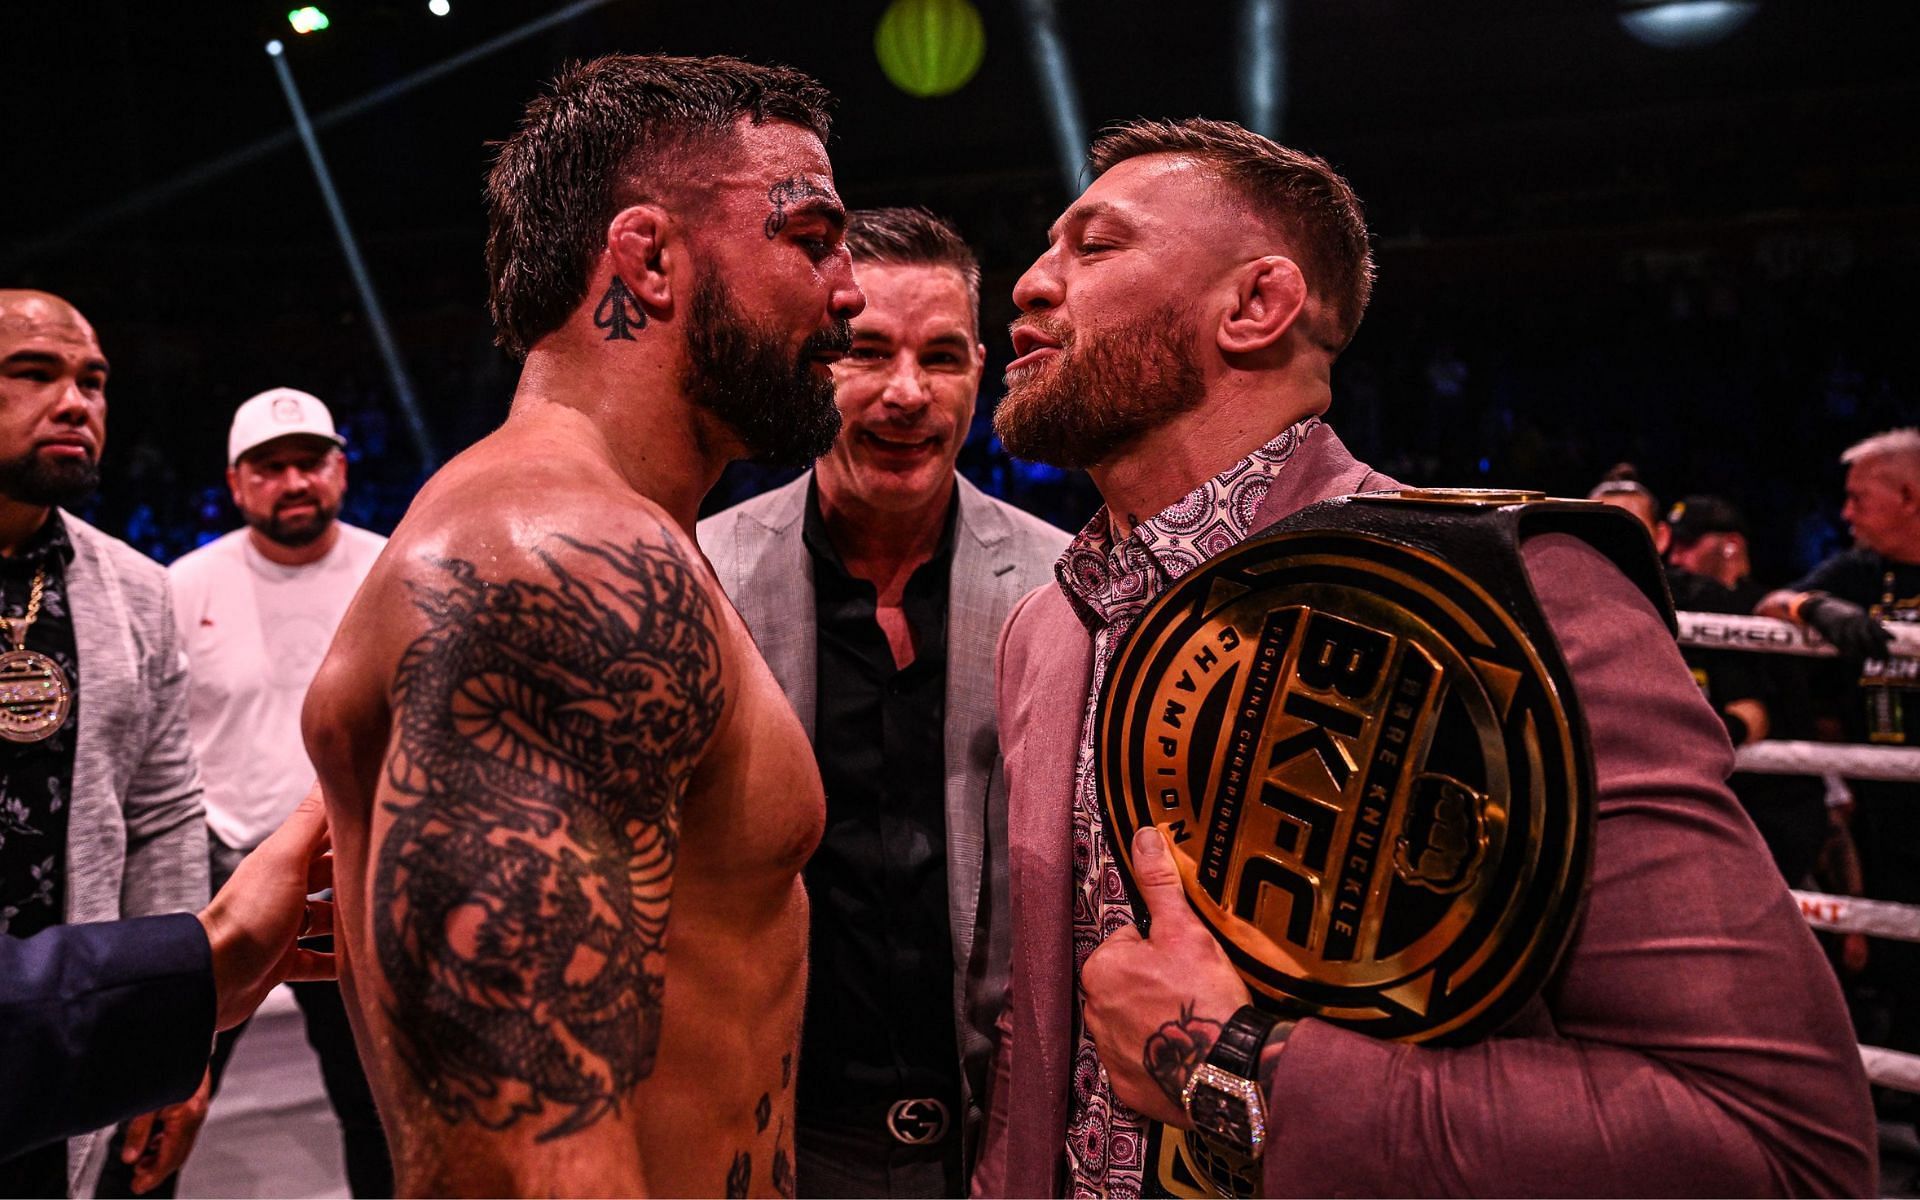 Mike Perry and Conor McGregor face off at BKFC 41. [via Twitter @MMAFighting]